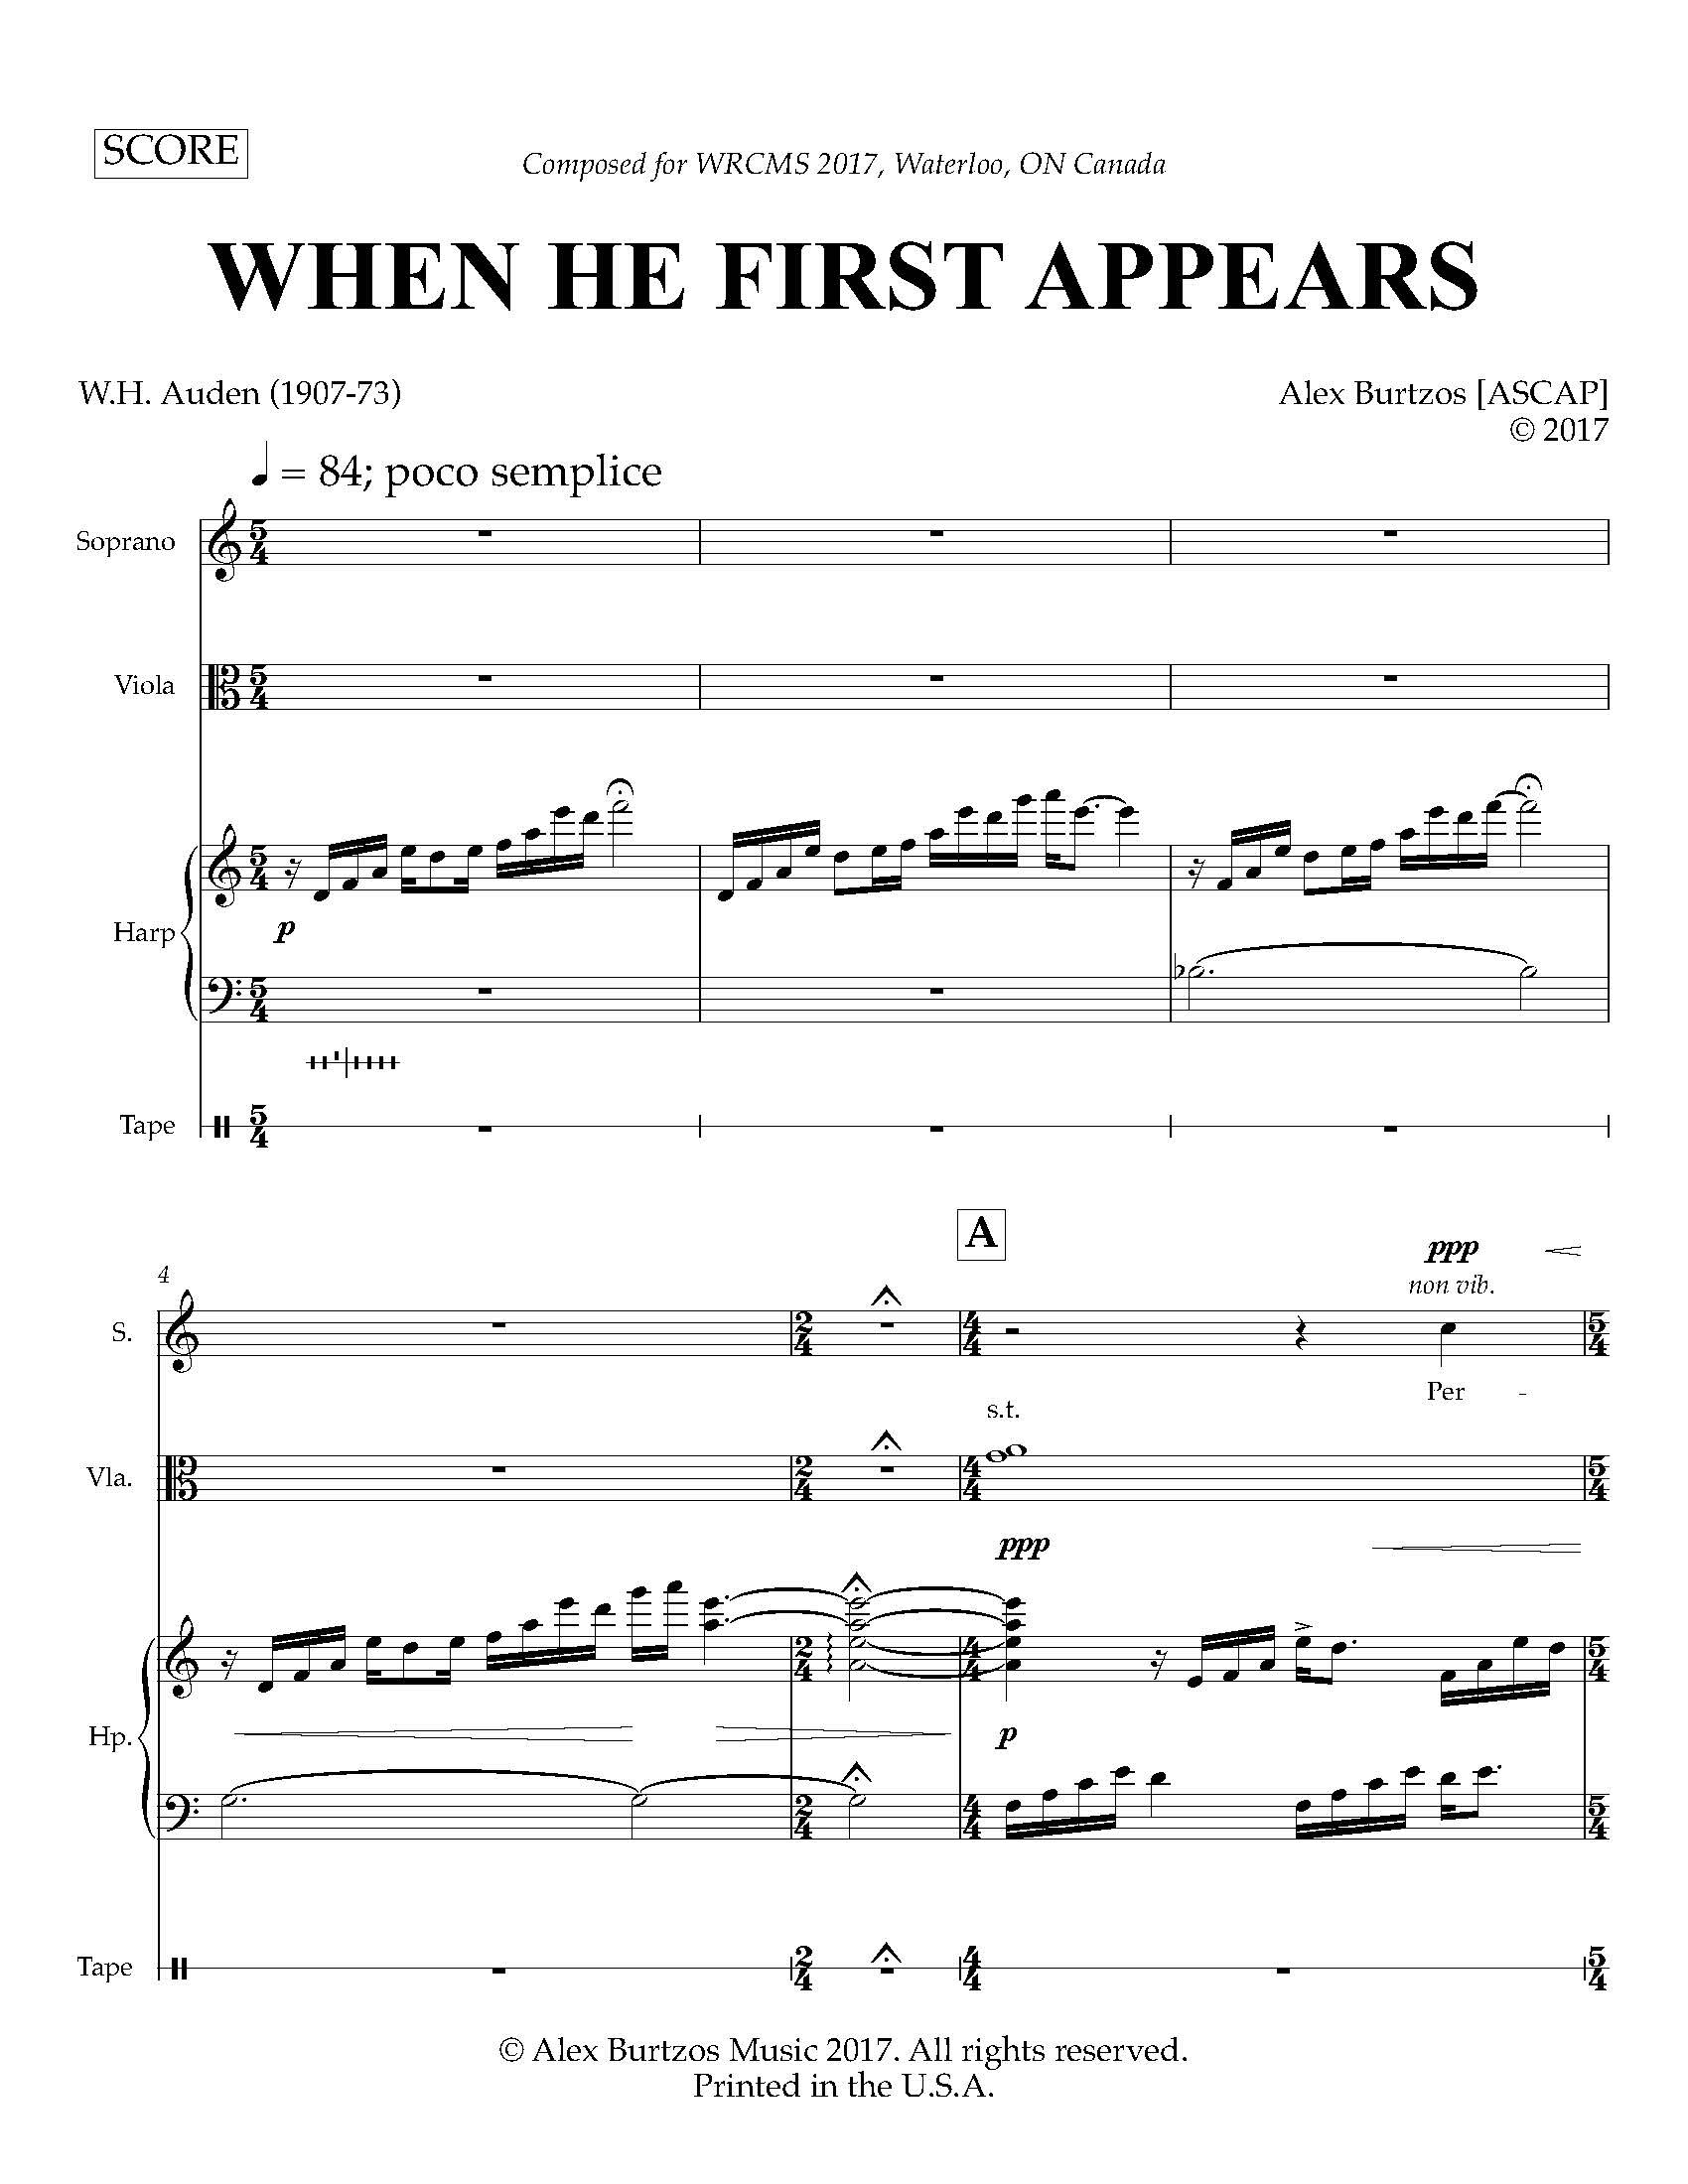 When He First Appears - Complete Score_Page_09.jpg